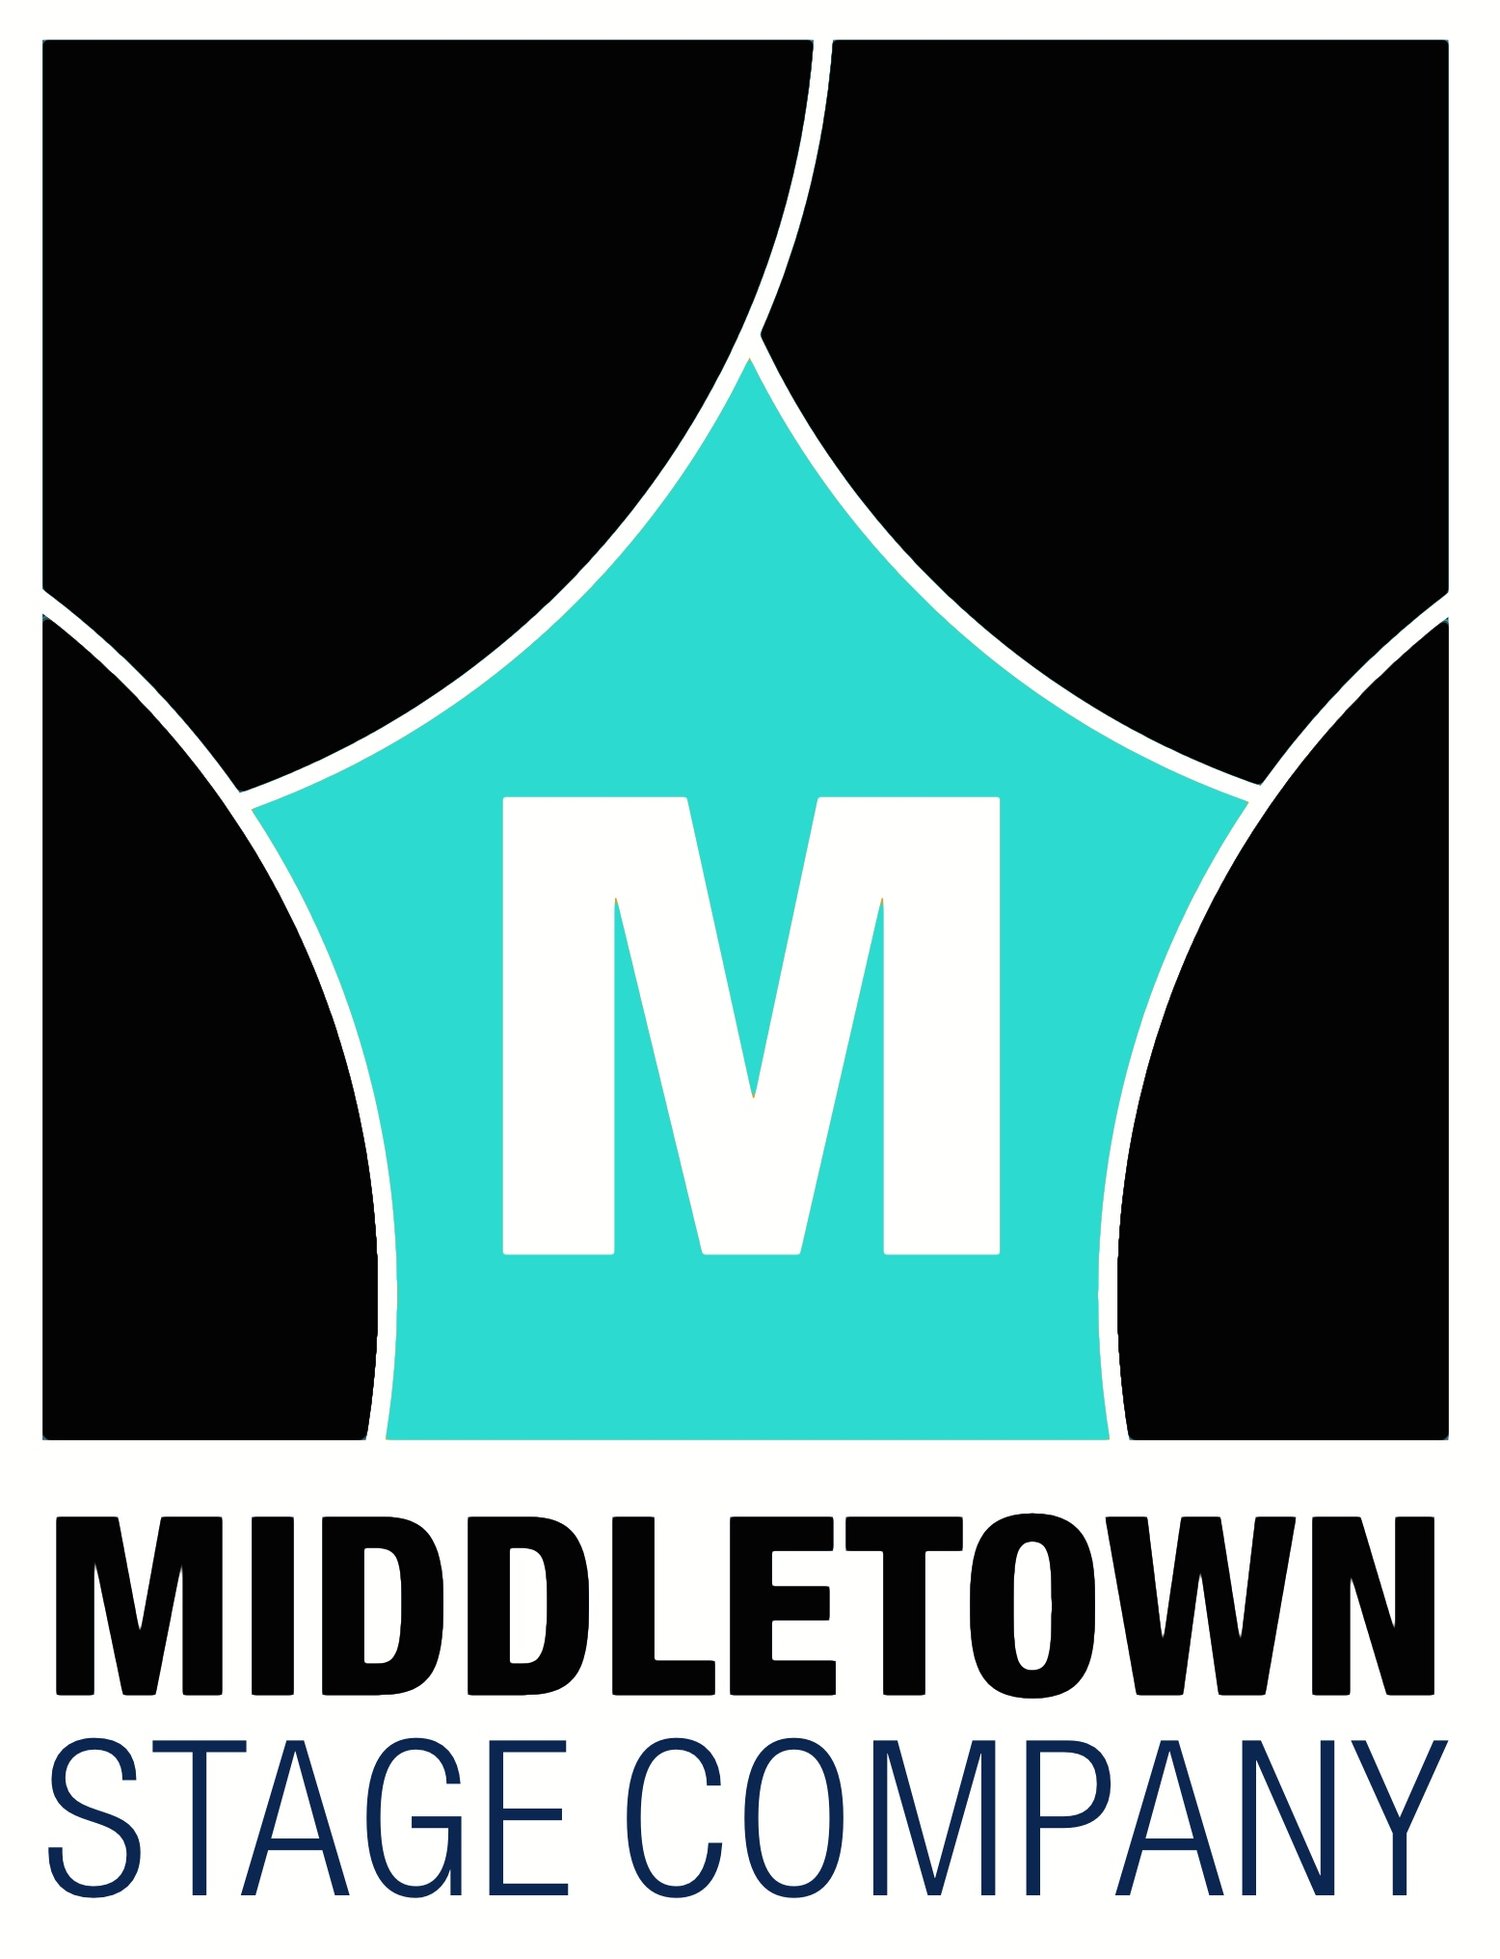 Middletown Stage Company